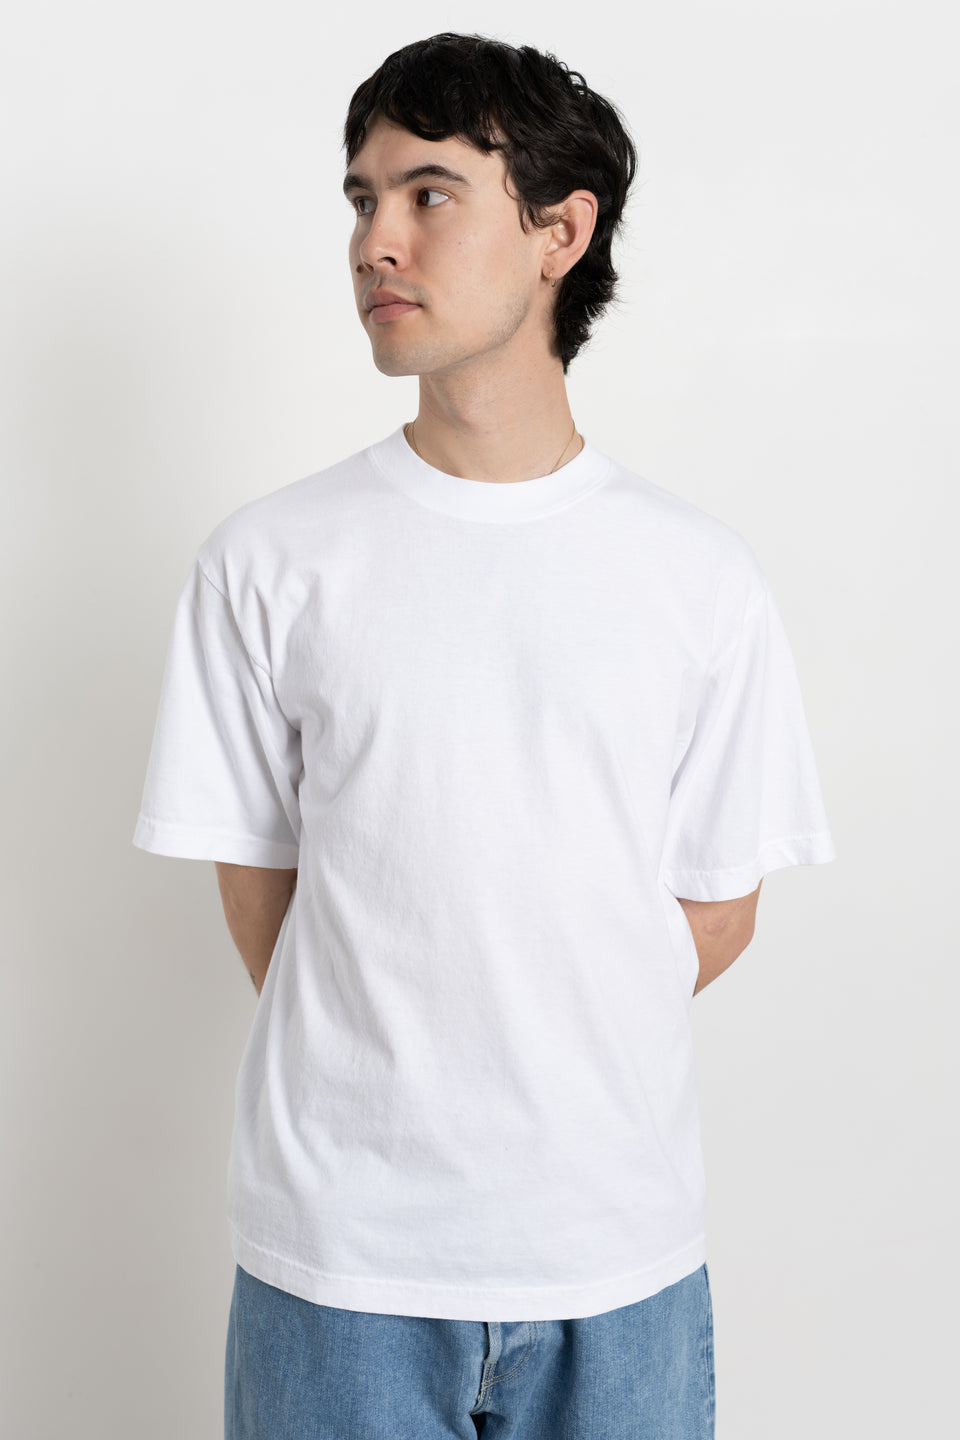 Garment Dyed US Cotton Tee White Men's Made in USA Calculus Online